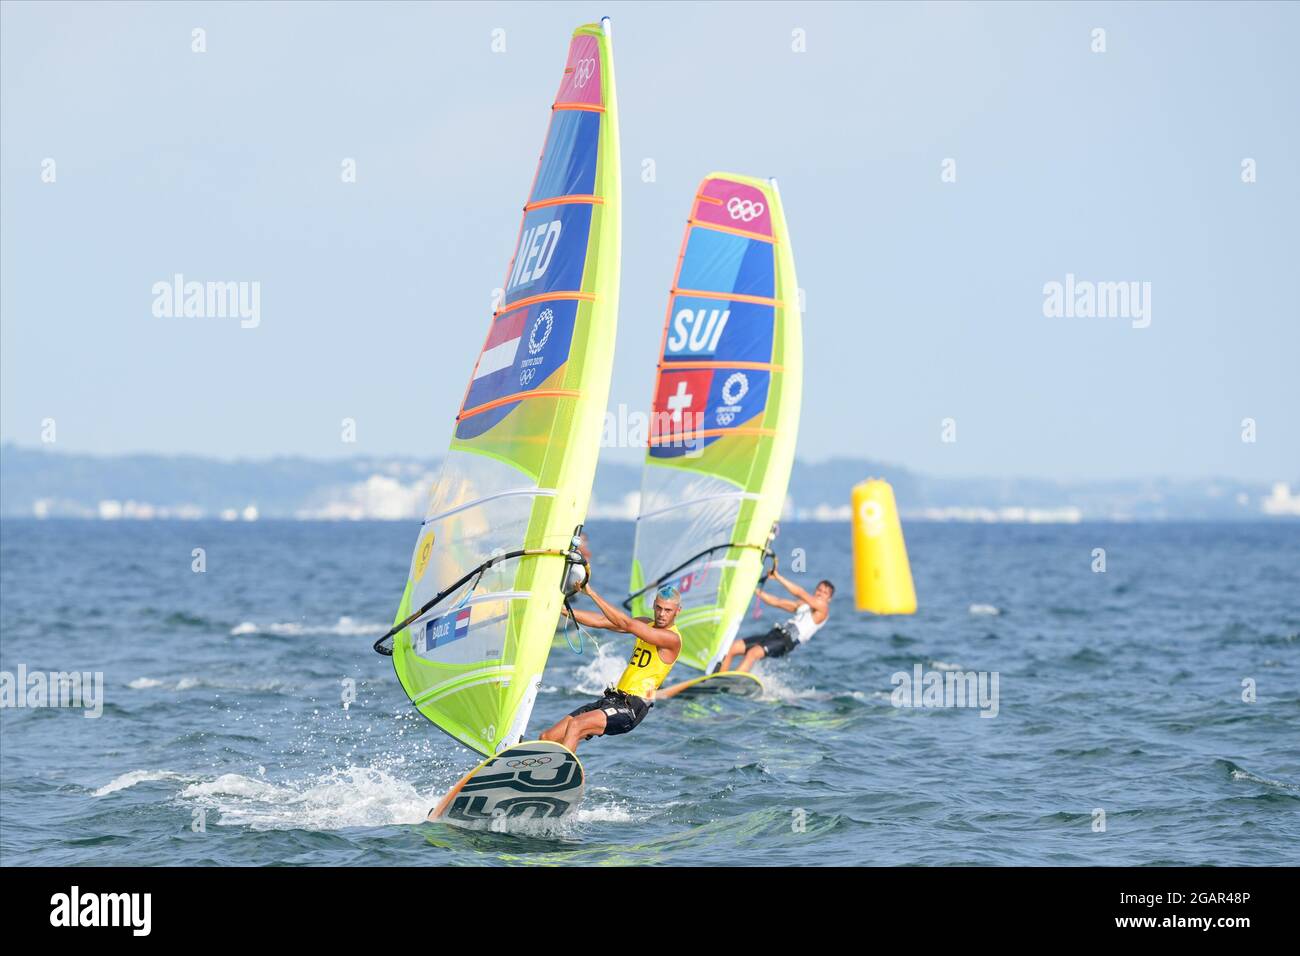 TOKYO, JAPAN - JULY 31: Kiran Badloe of the Netherlands competing on Men's Windsufer - RS:X during the Tokyo 2020 Olympic Games at the Sagami on July 31, 2021 in Tokyo, Japan (Photo by Ronald Hoogendoorn/Orange Pictures) NOCNSF Stock Photo